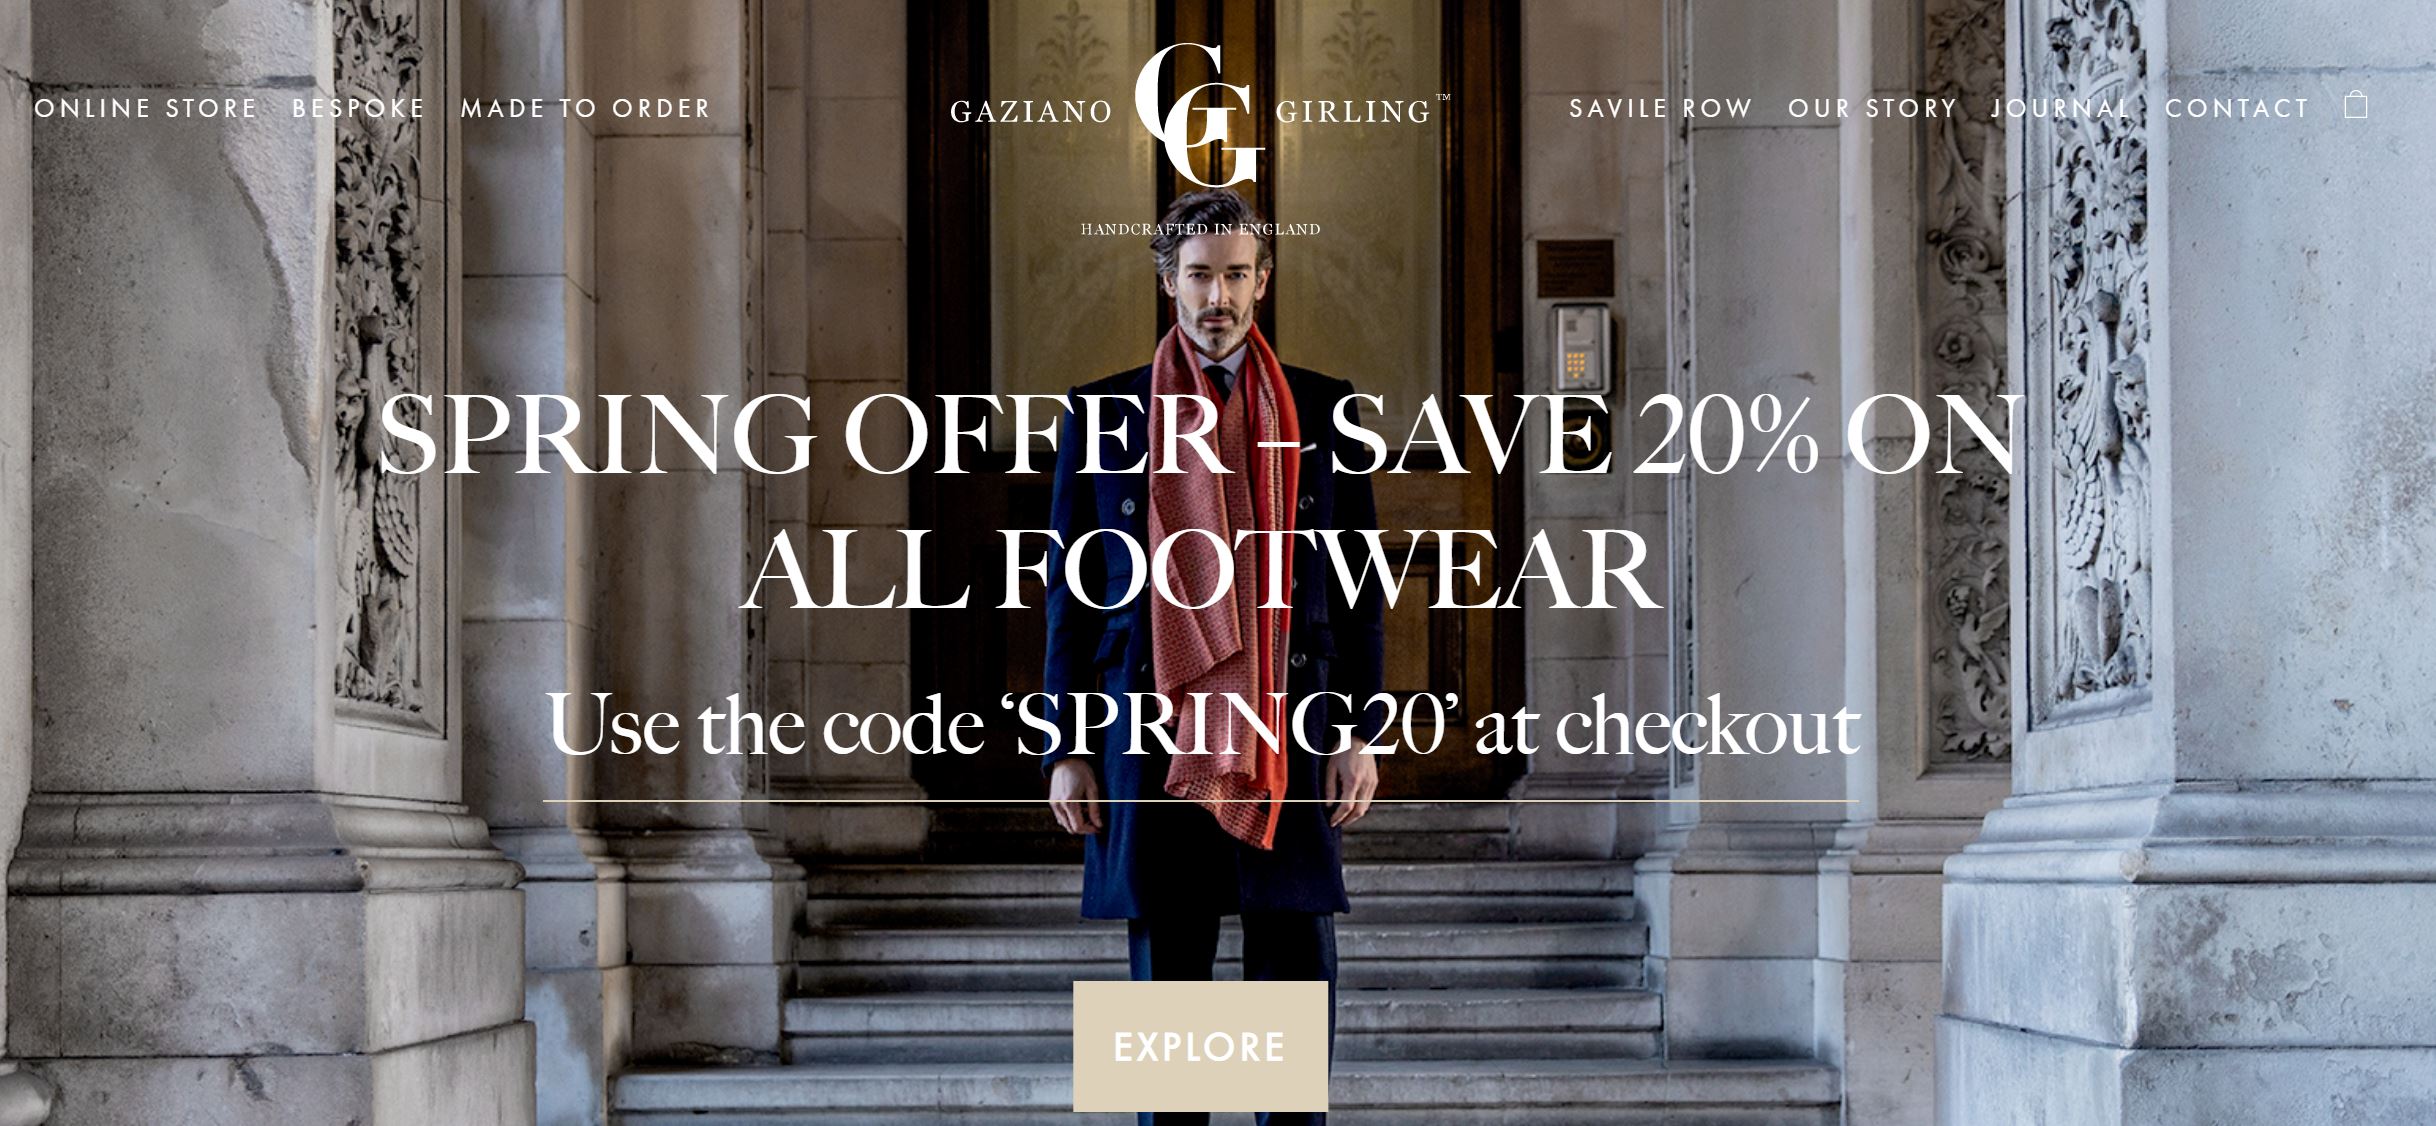 Welted Shoe News April 2020 - Gaziano & Girling Spring Sale